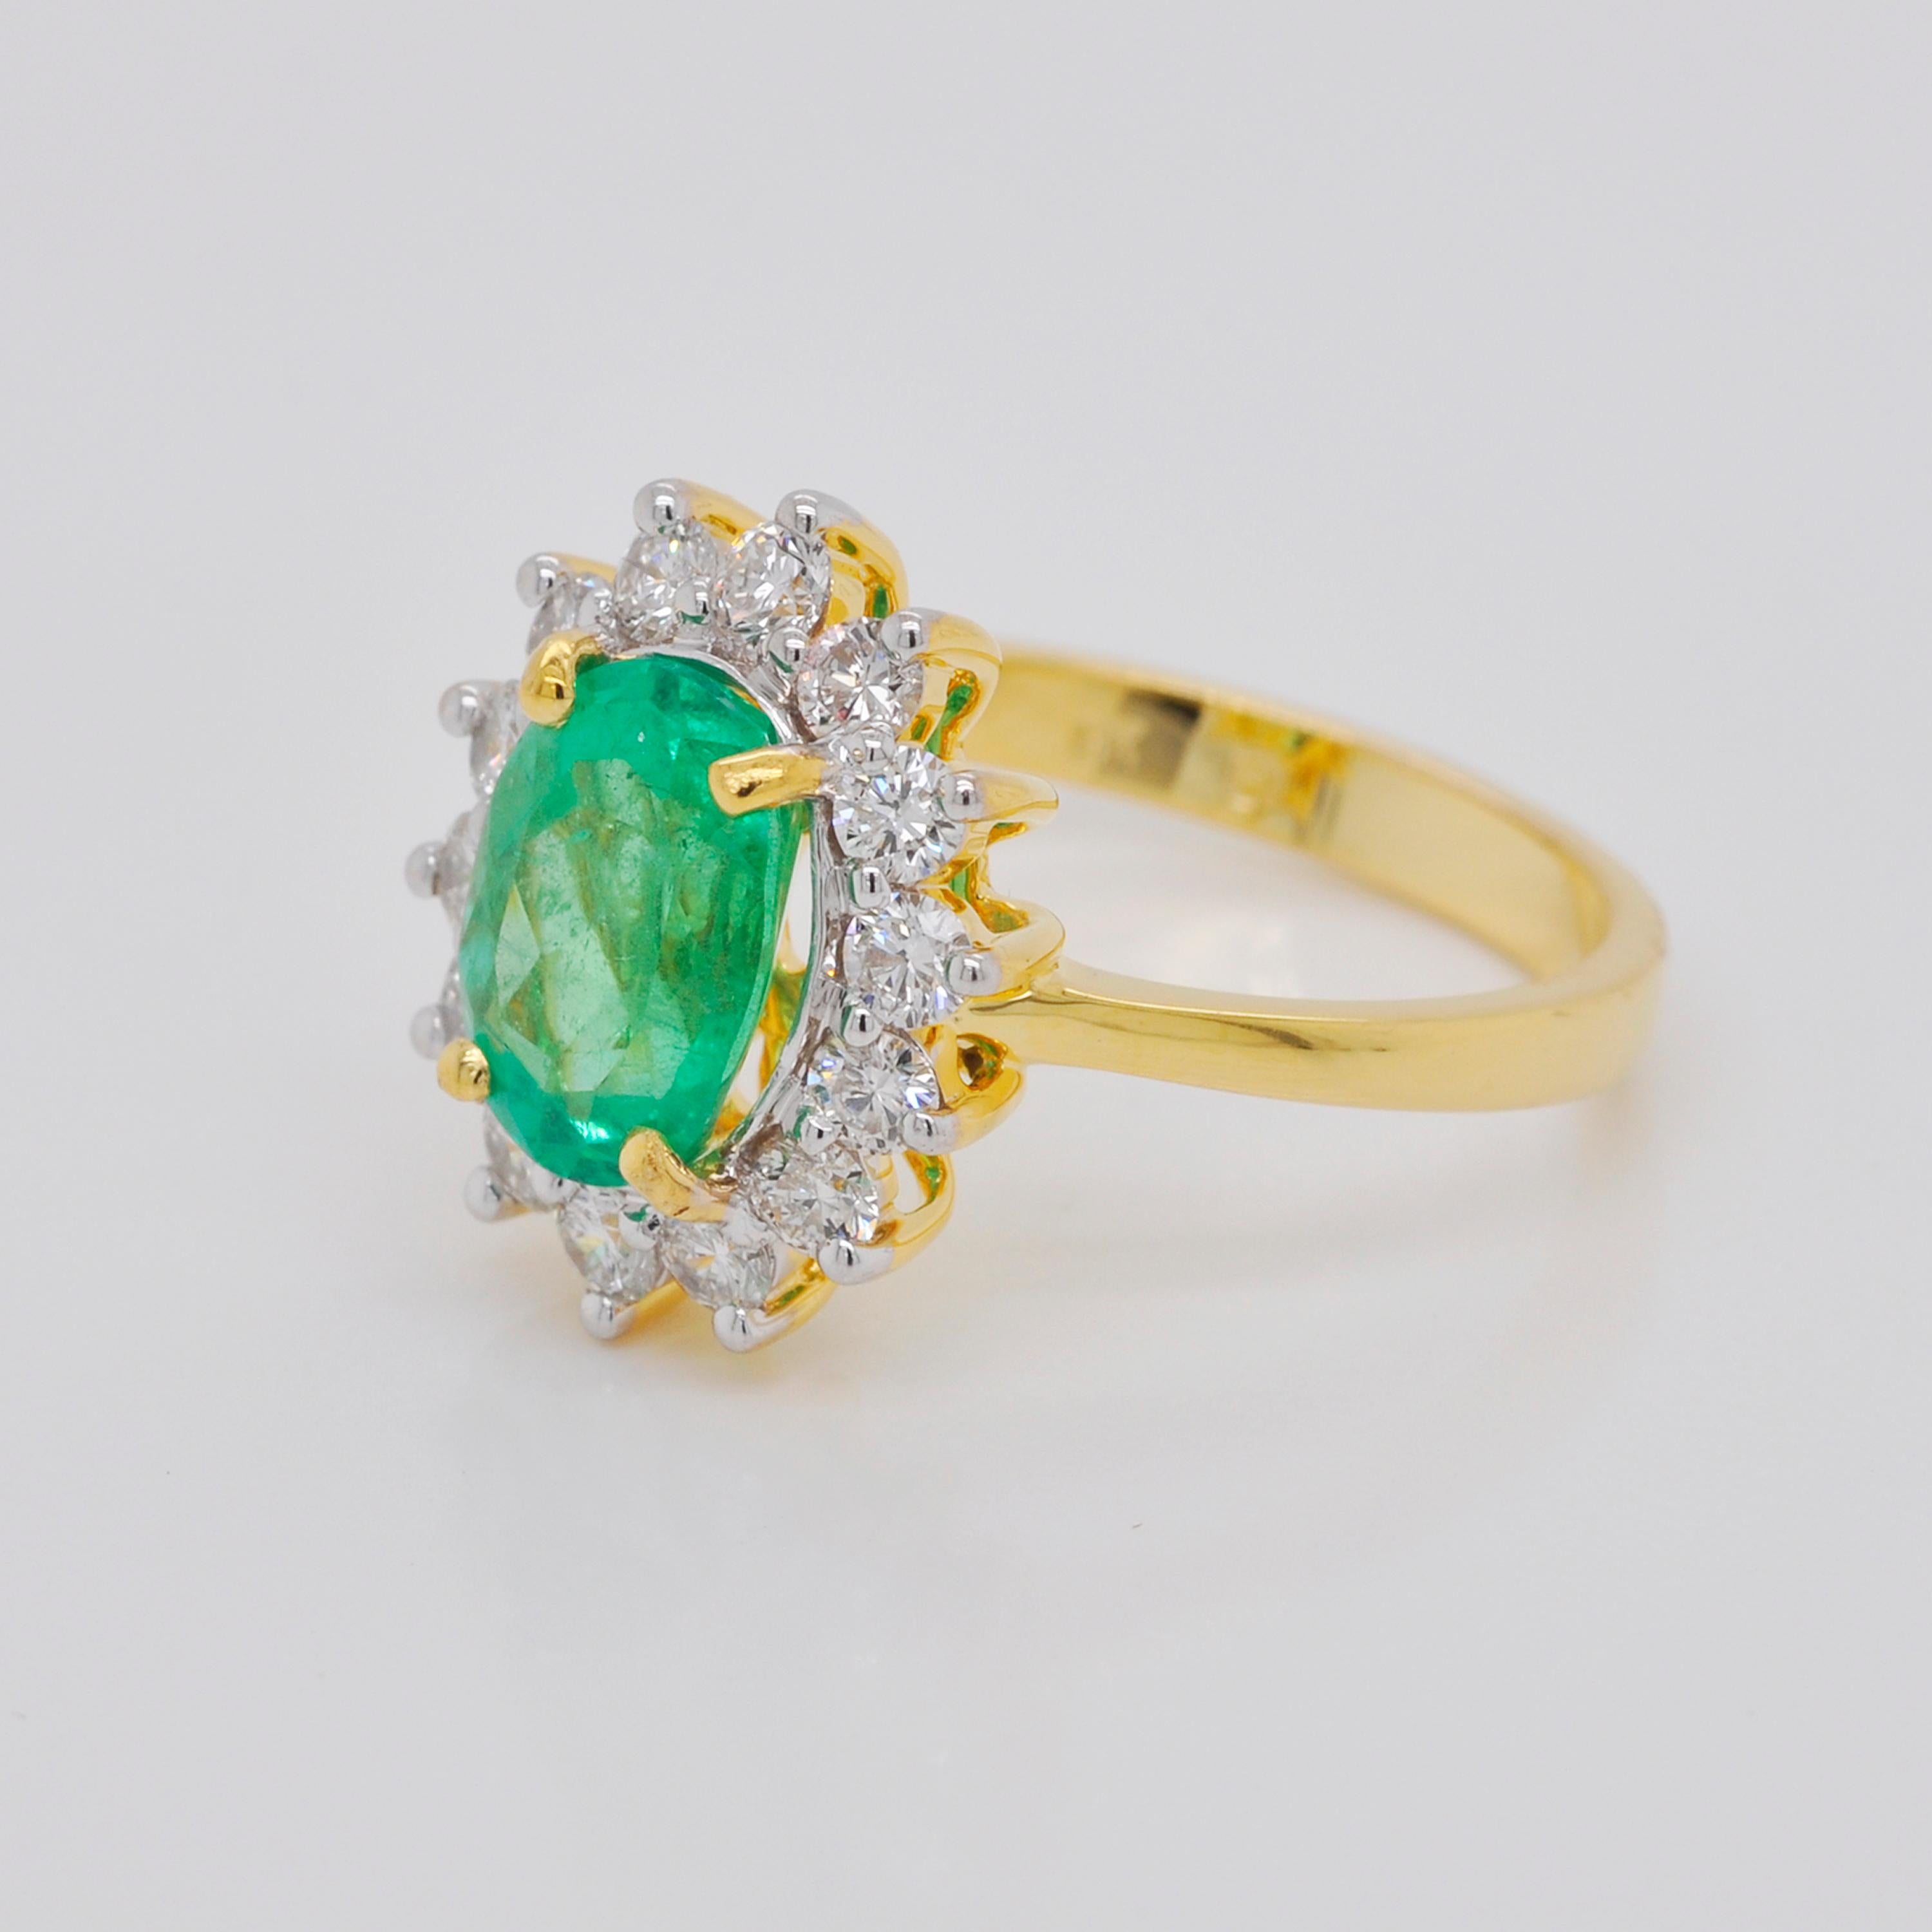 18 Karat Gold Certified Oval Colombian Emerald Diamond Engagement Ring 4